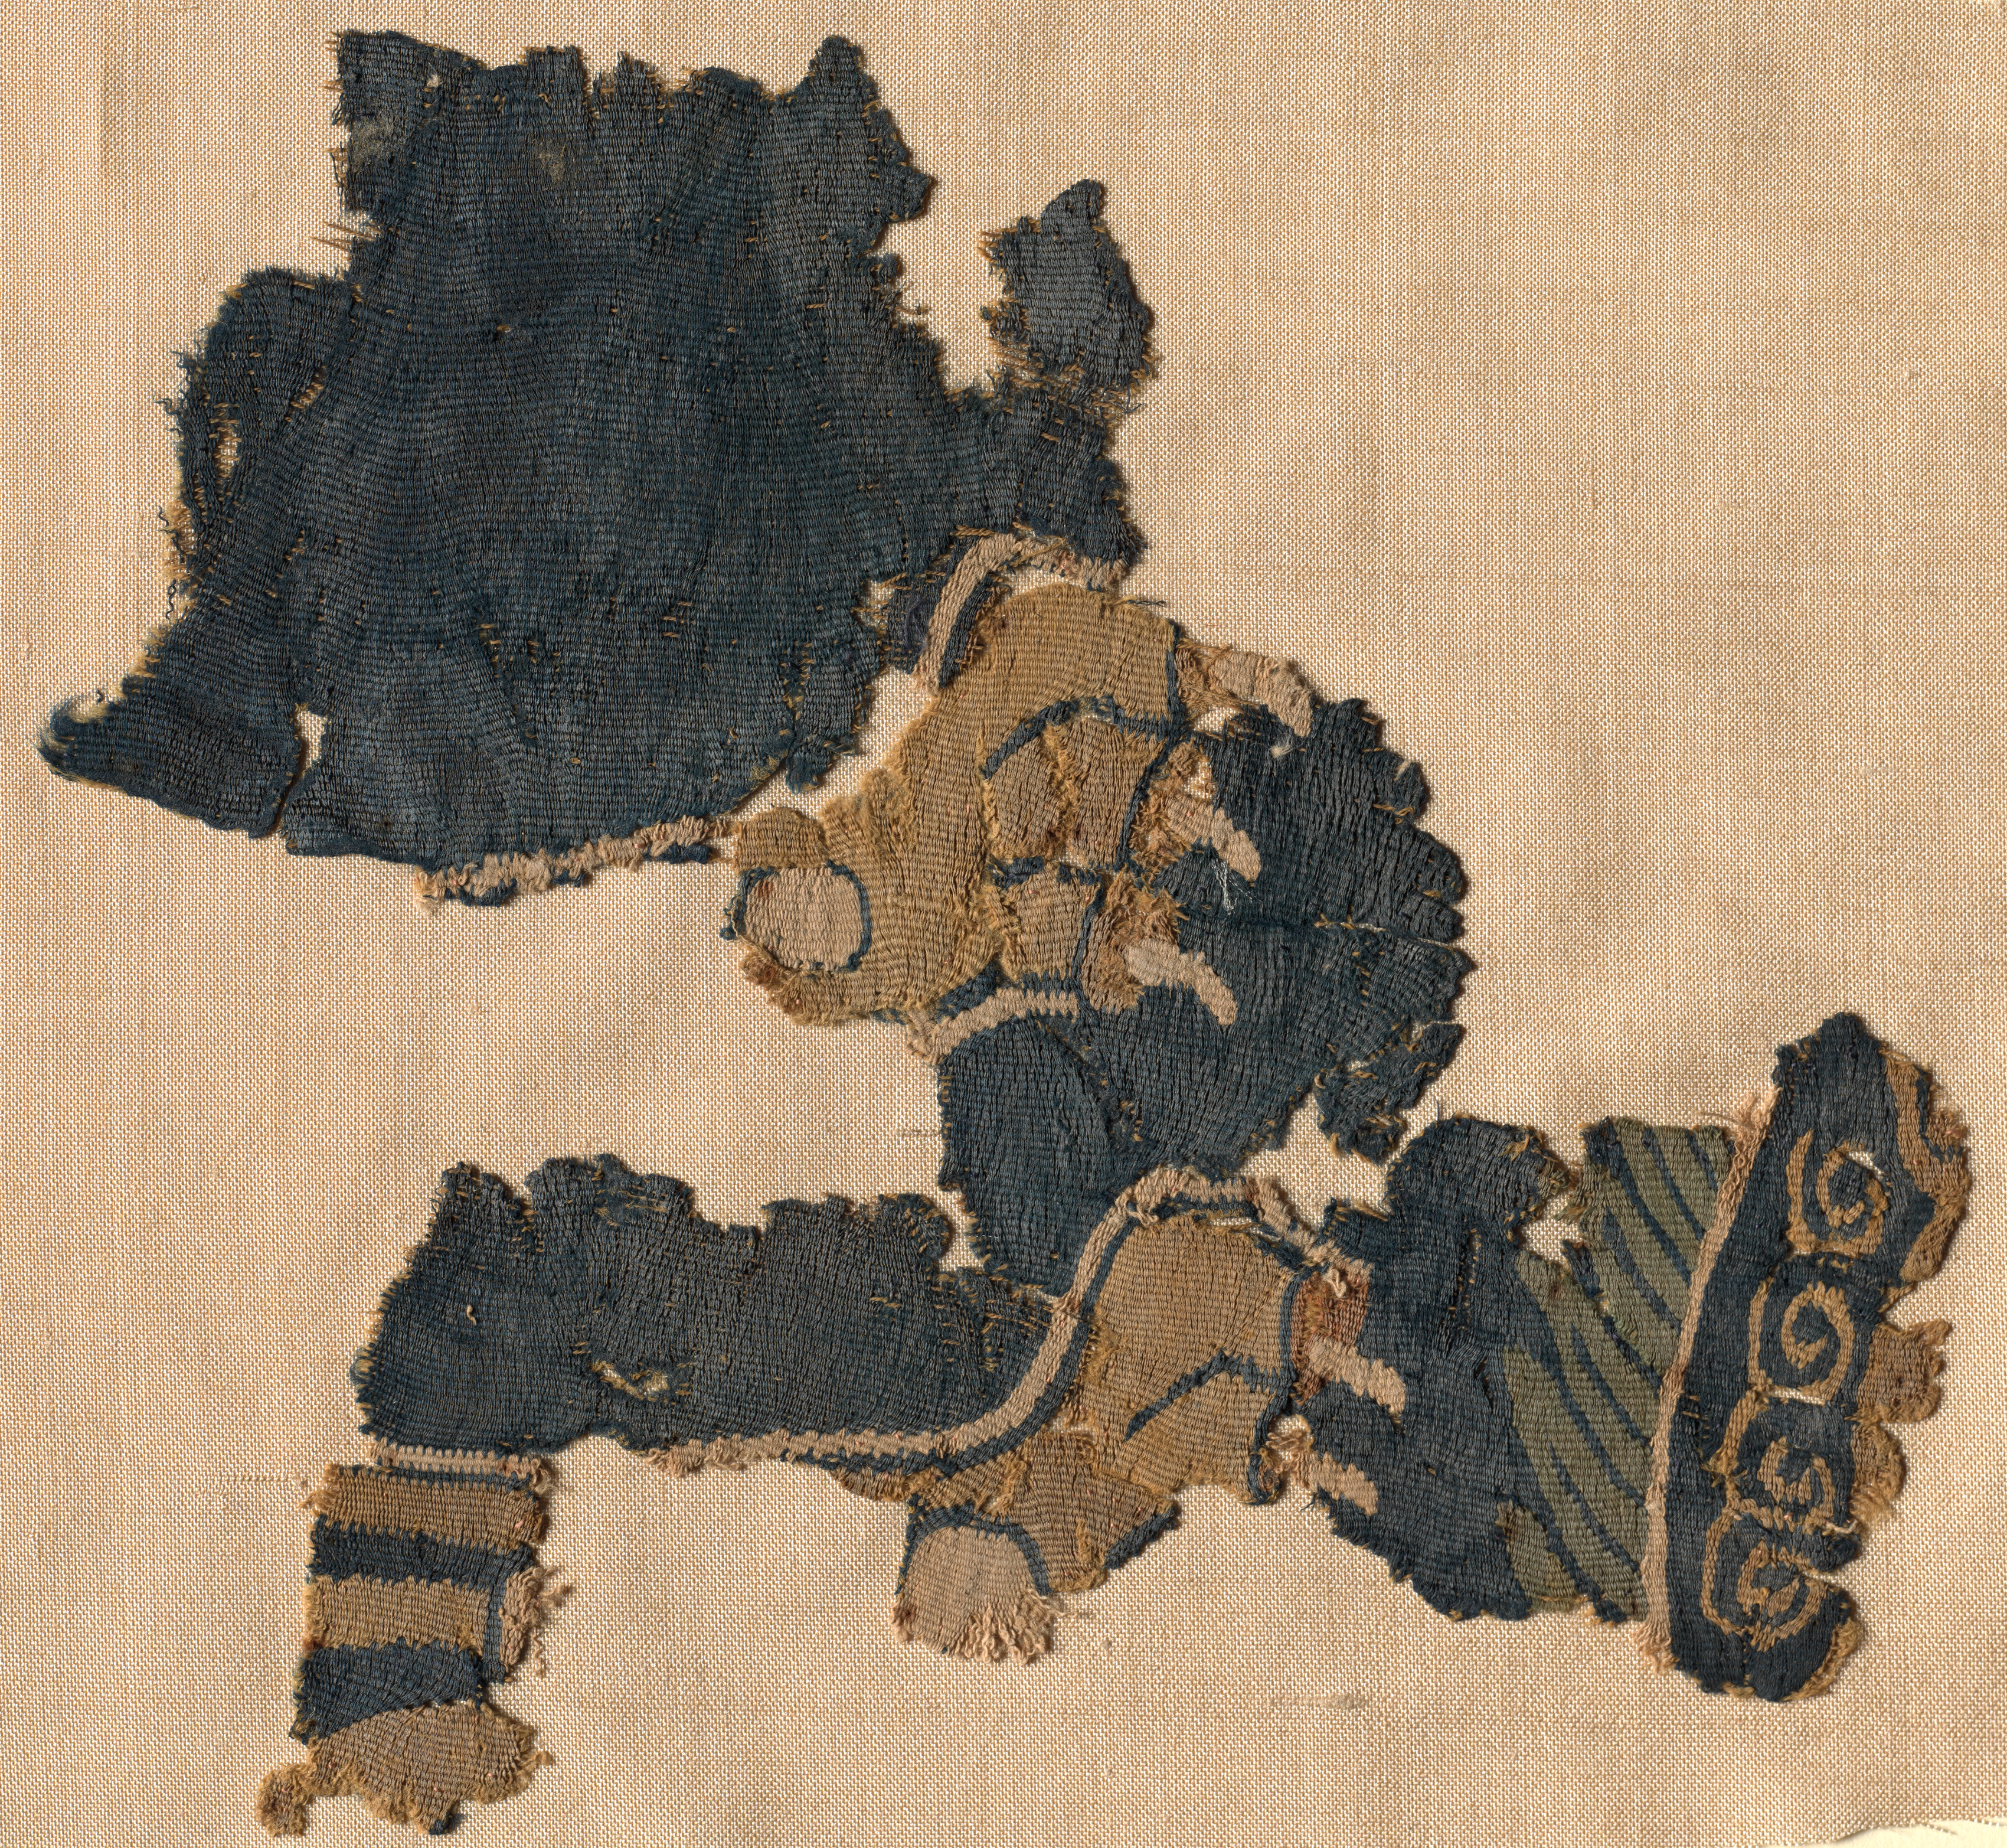 Fragment, probably from a large hanging